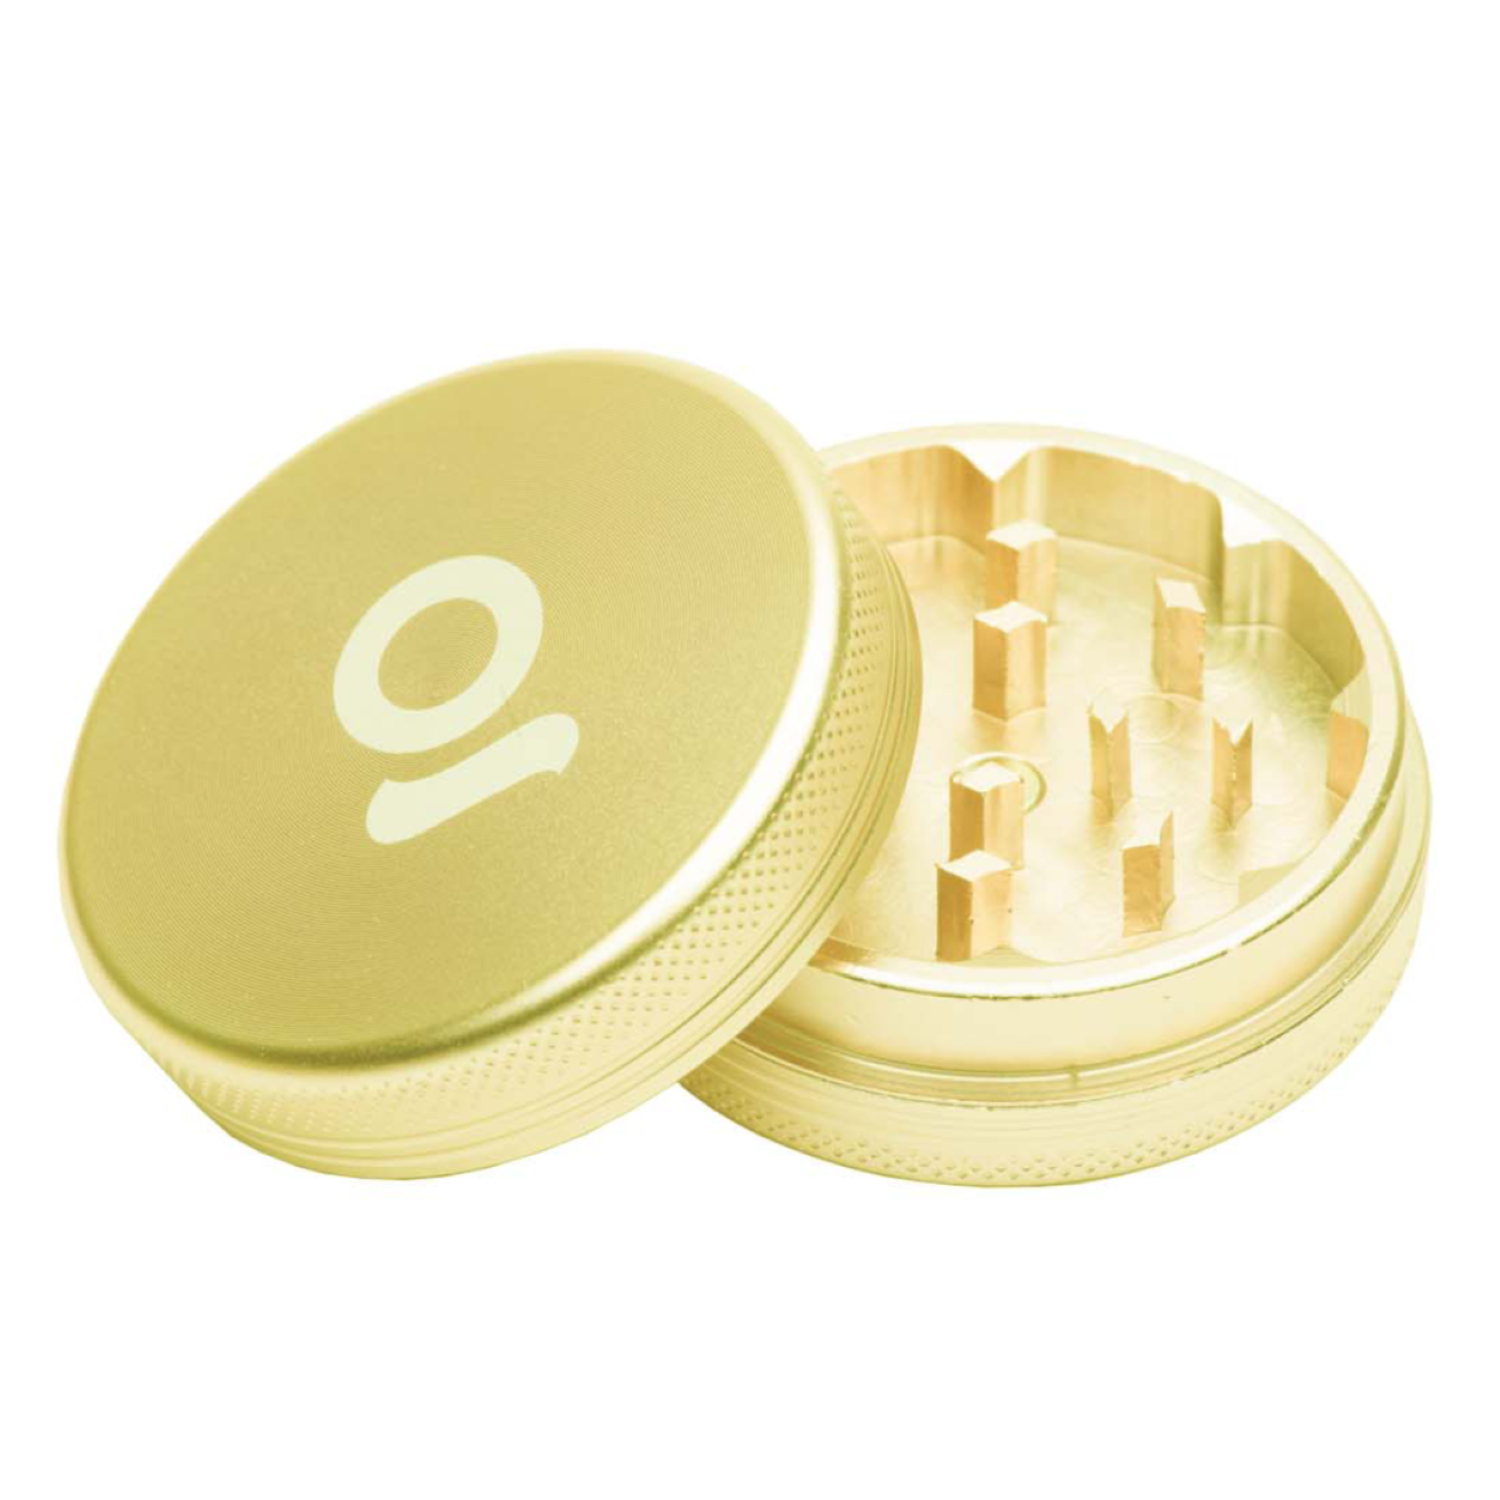 Ongrok 2-Piece Metal Grinder by Ongrok | Mission Dispensary